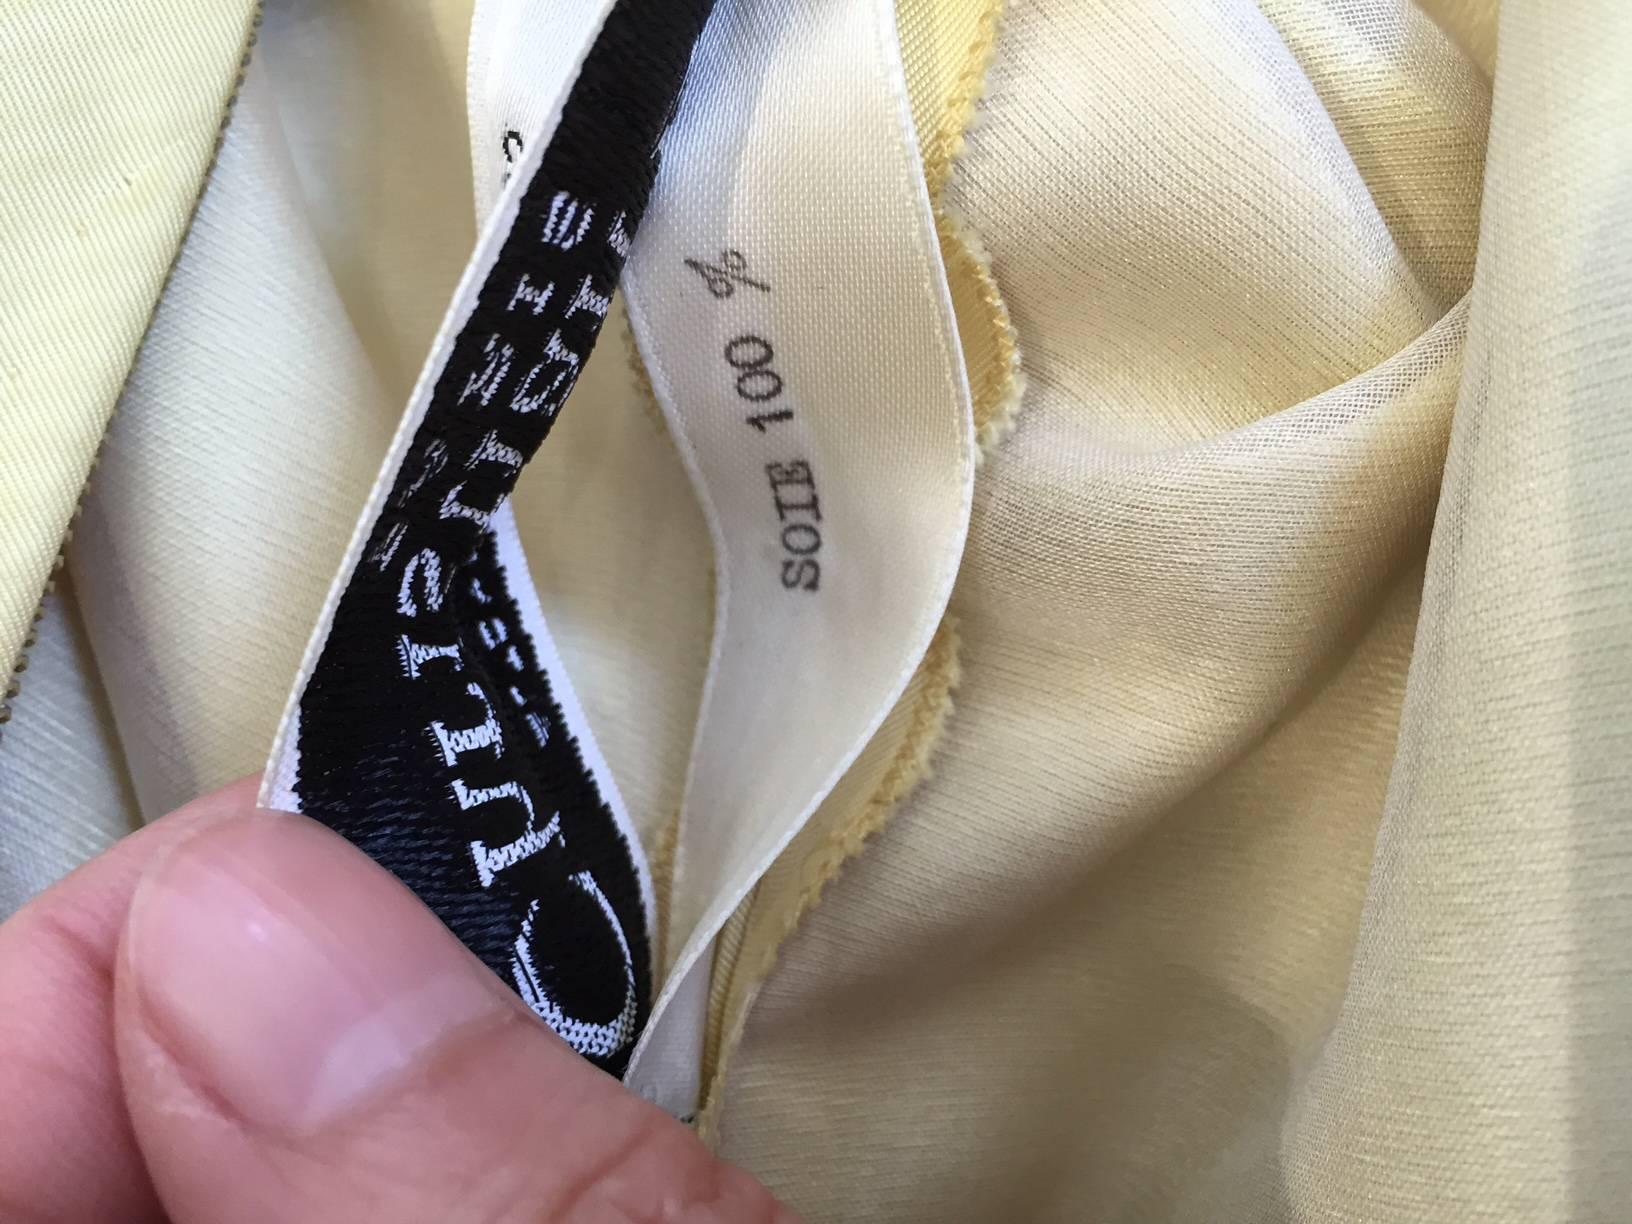 Christian Dior by Marc Bohan Haute Couture 1982 
Yellow Silk Cocktail Dress For Sale 1